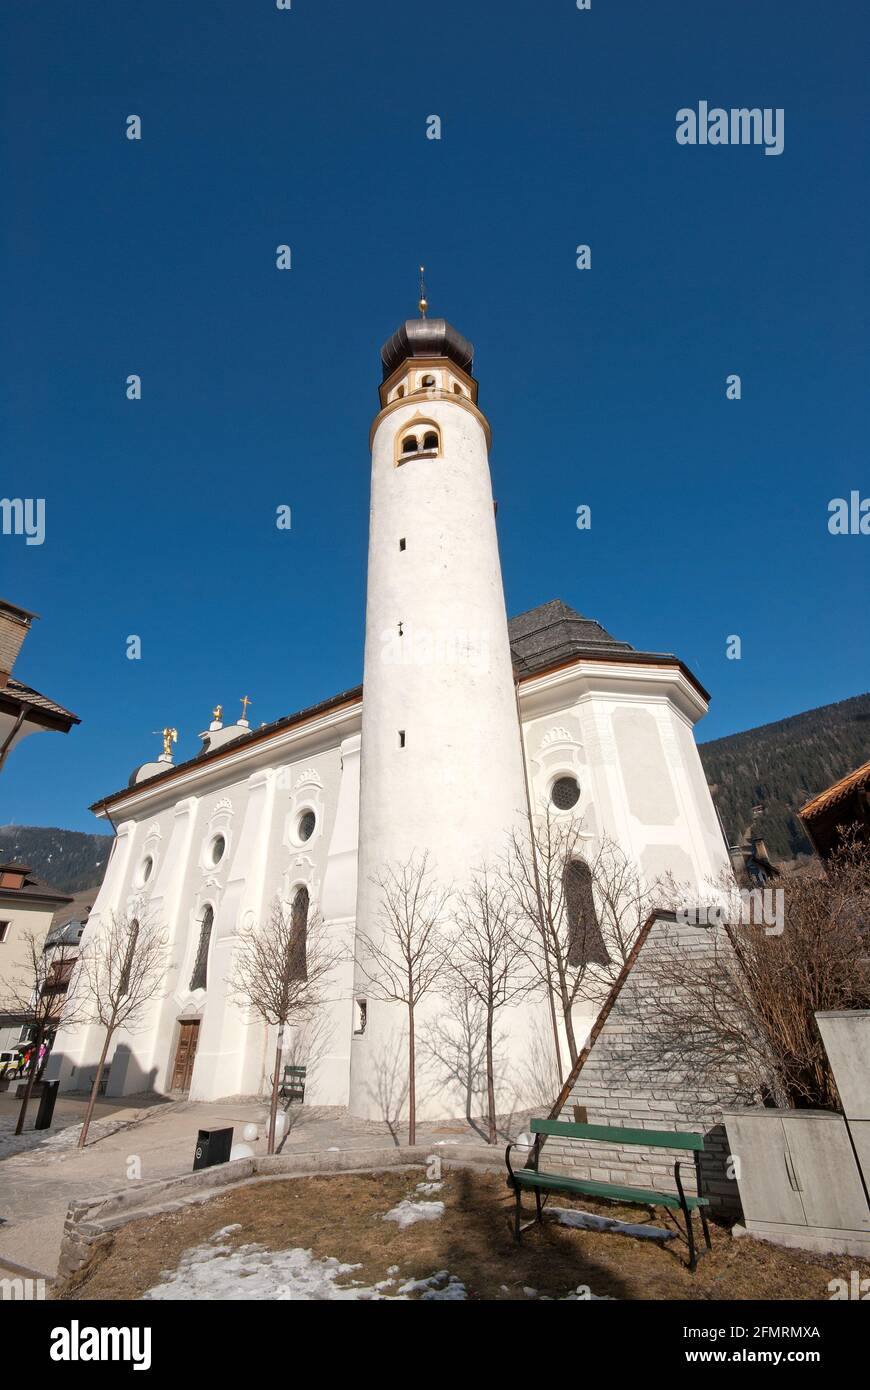 San Michael parish church with cylindrical bell tower in San Candido (Innichen), Pusteria Valley, Trentino-Alto Adige, Italy Stock Photo